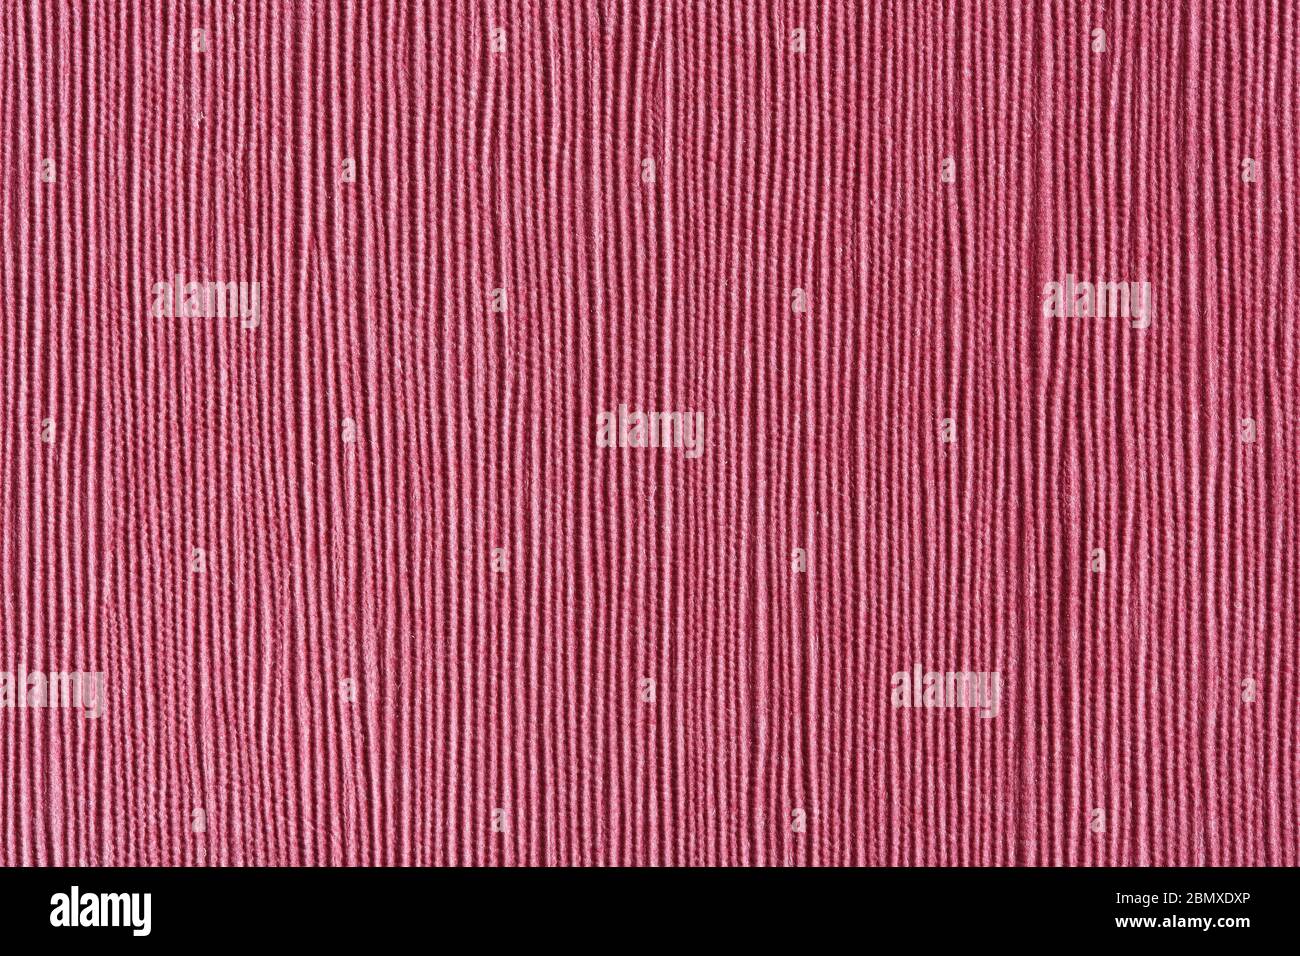 Pink paper background. Can be used as background in art or design projects. Stock Photo